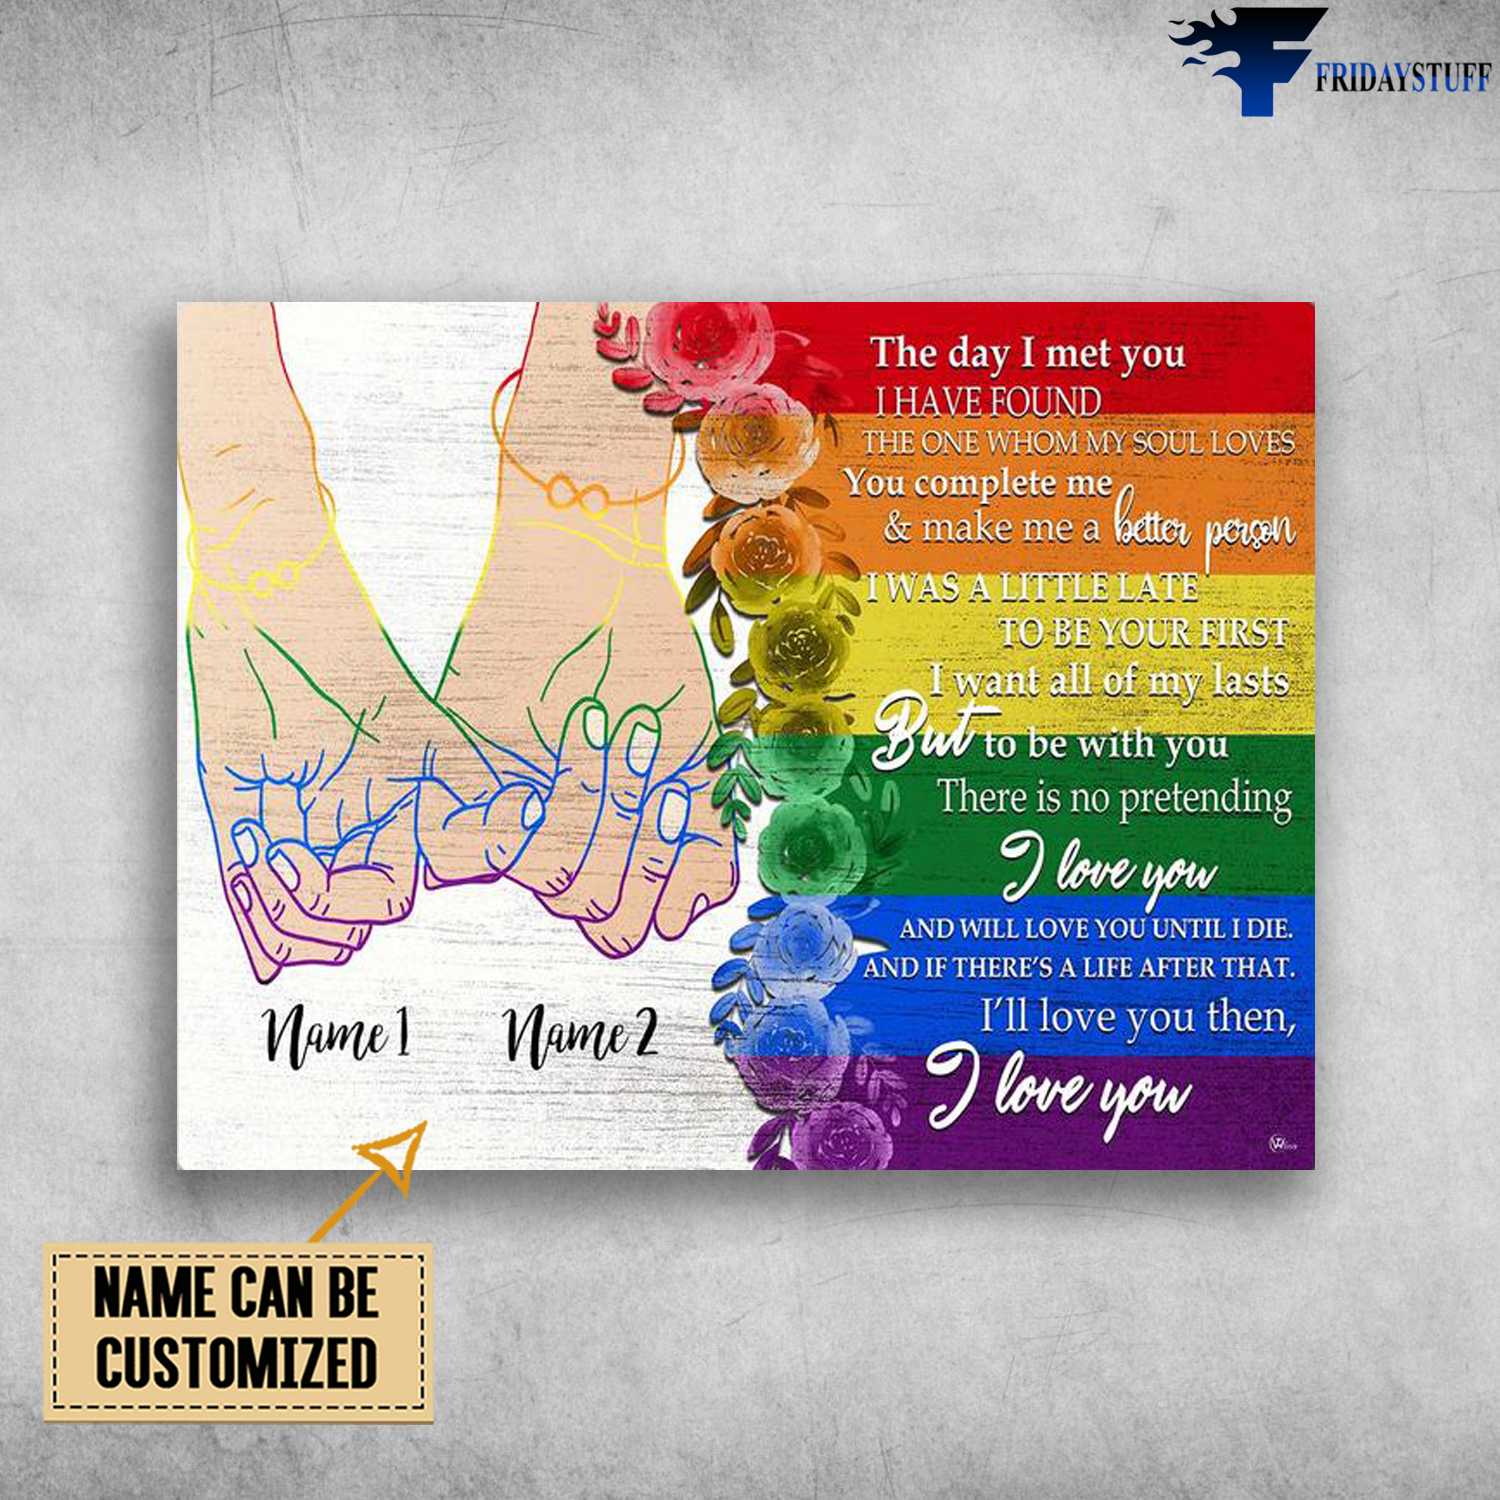 LGBT Poster, The Day I Met You, I Have Found, The One Ưhom My Soul Loves, You Complete Me, And make Me Better Person, I Was A Little Blate, To be Your First